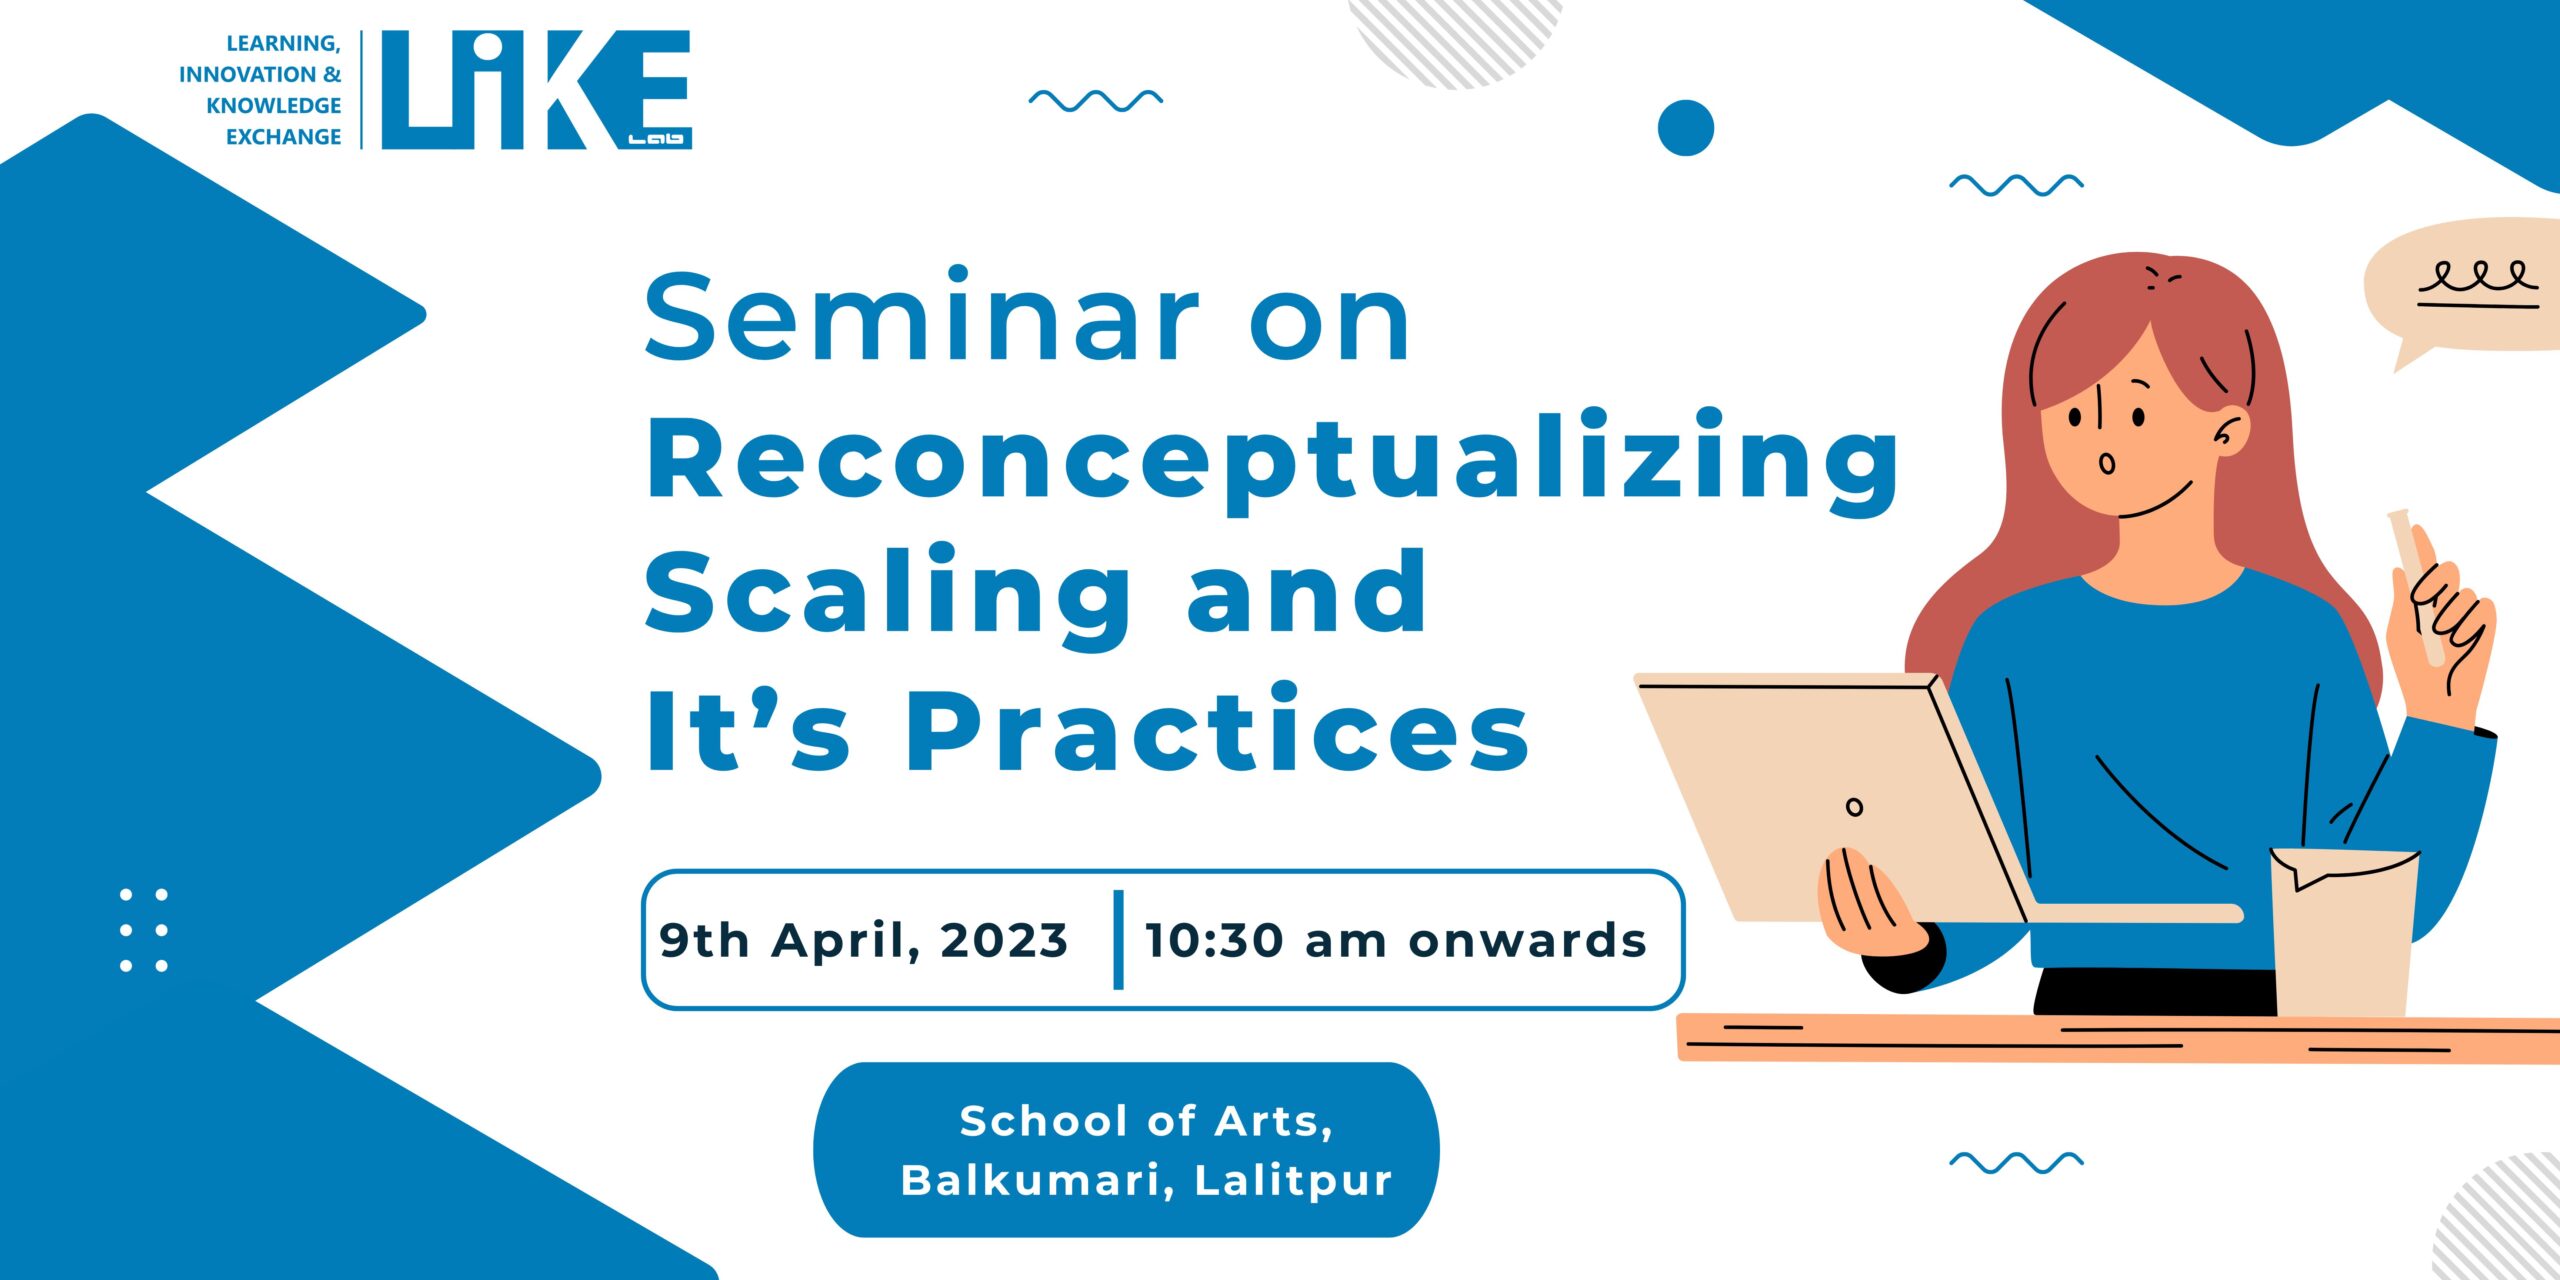 Seminar on “Reconceptualizing Scaling and Practices”